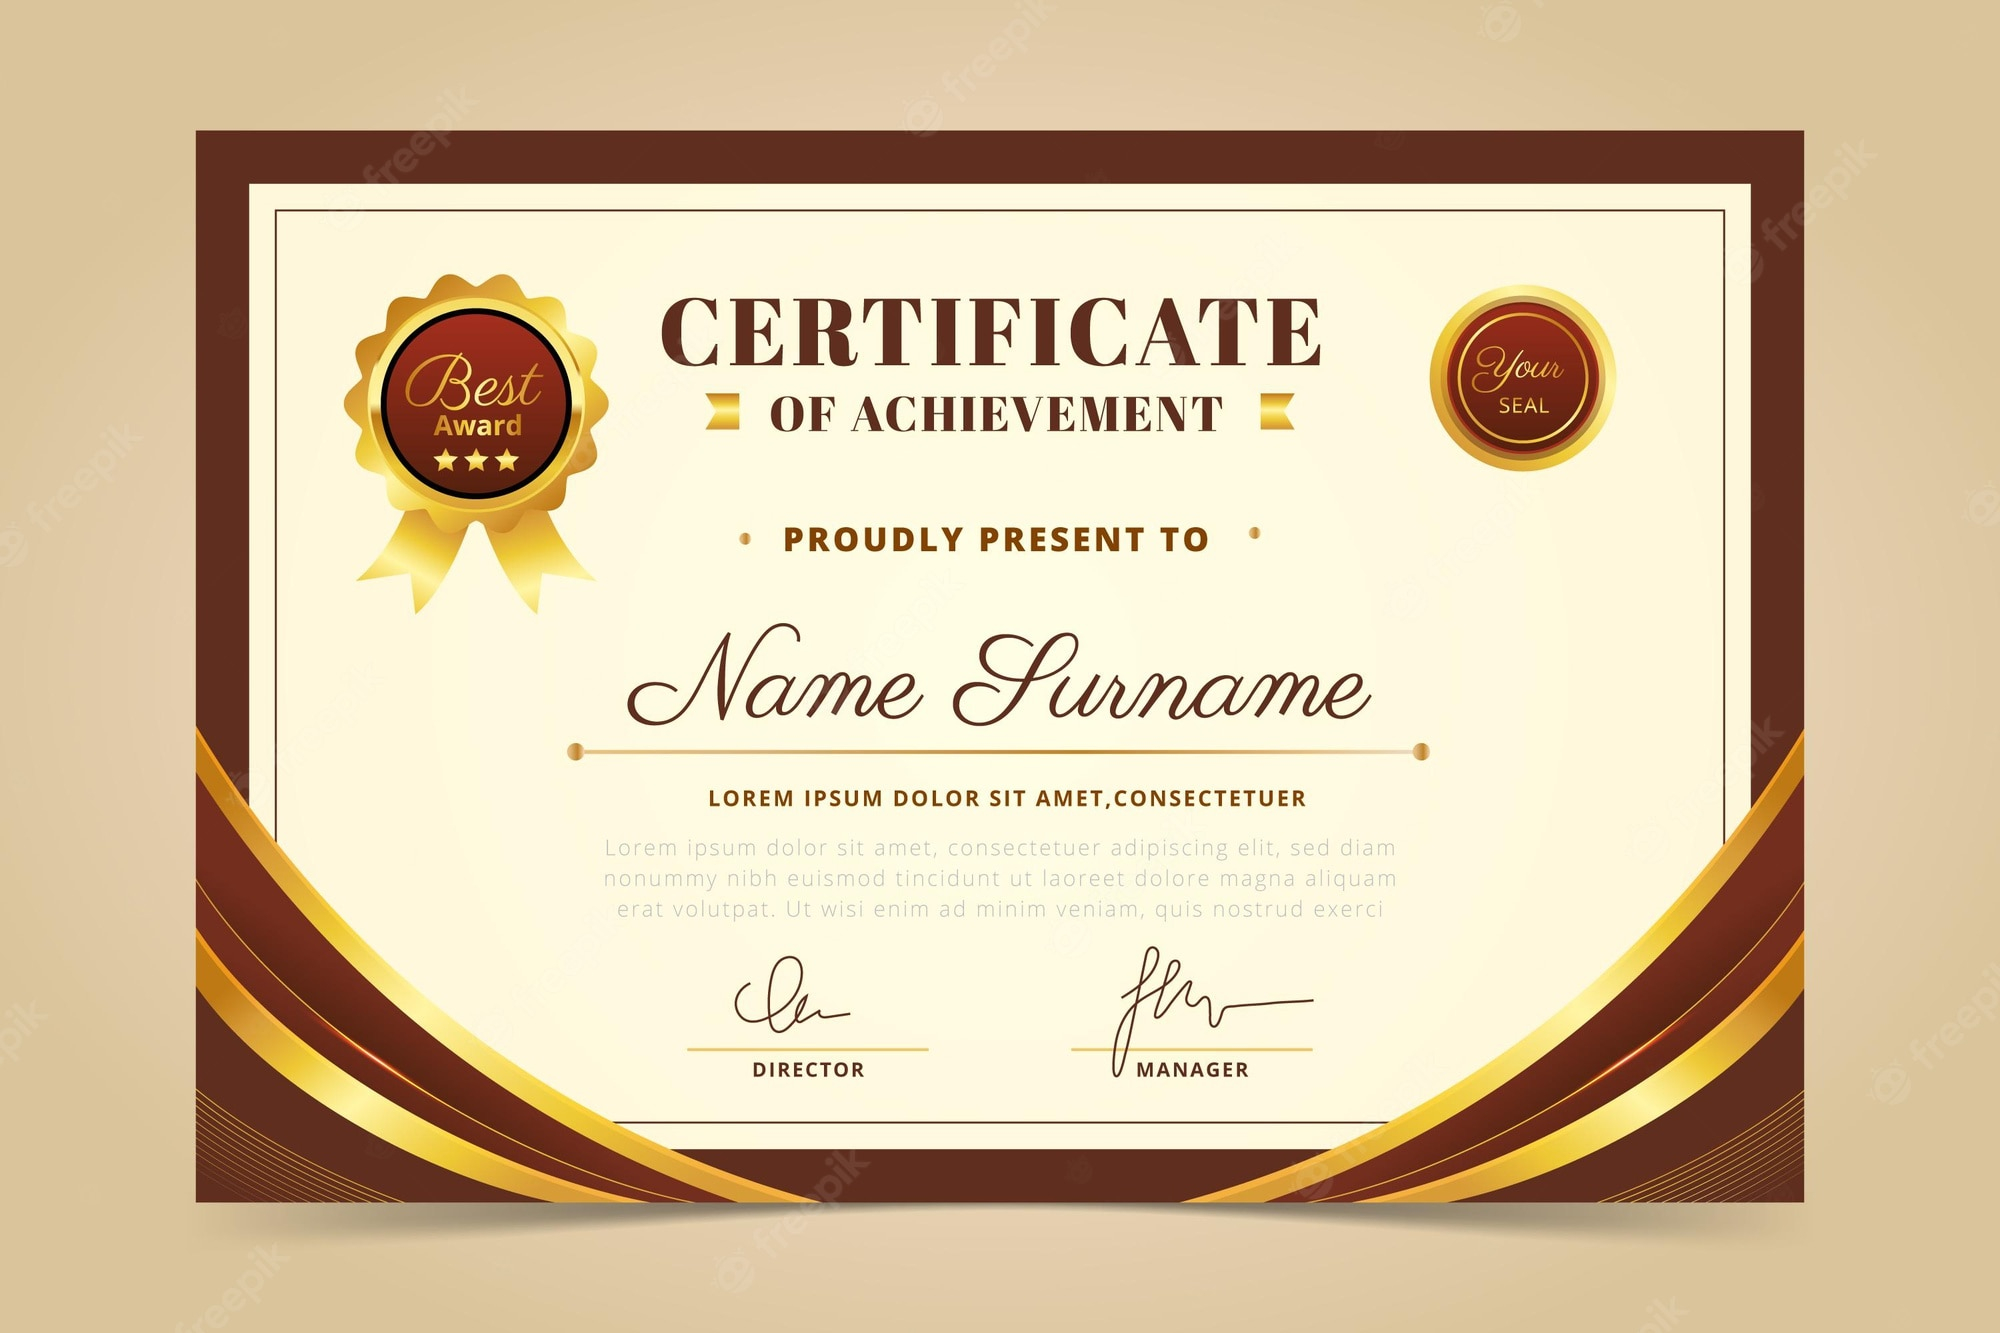 Employee Certificate Images  Free Vectors, Stock Photos & PSD For Best Employee Award Certificate Templates